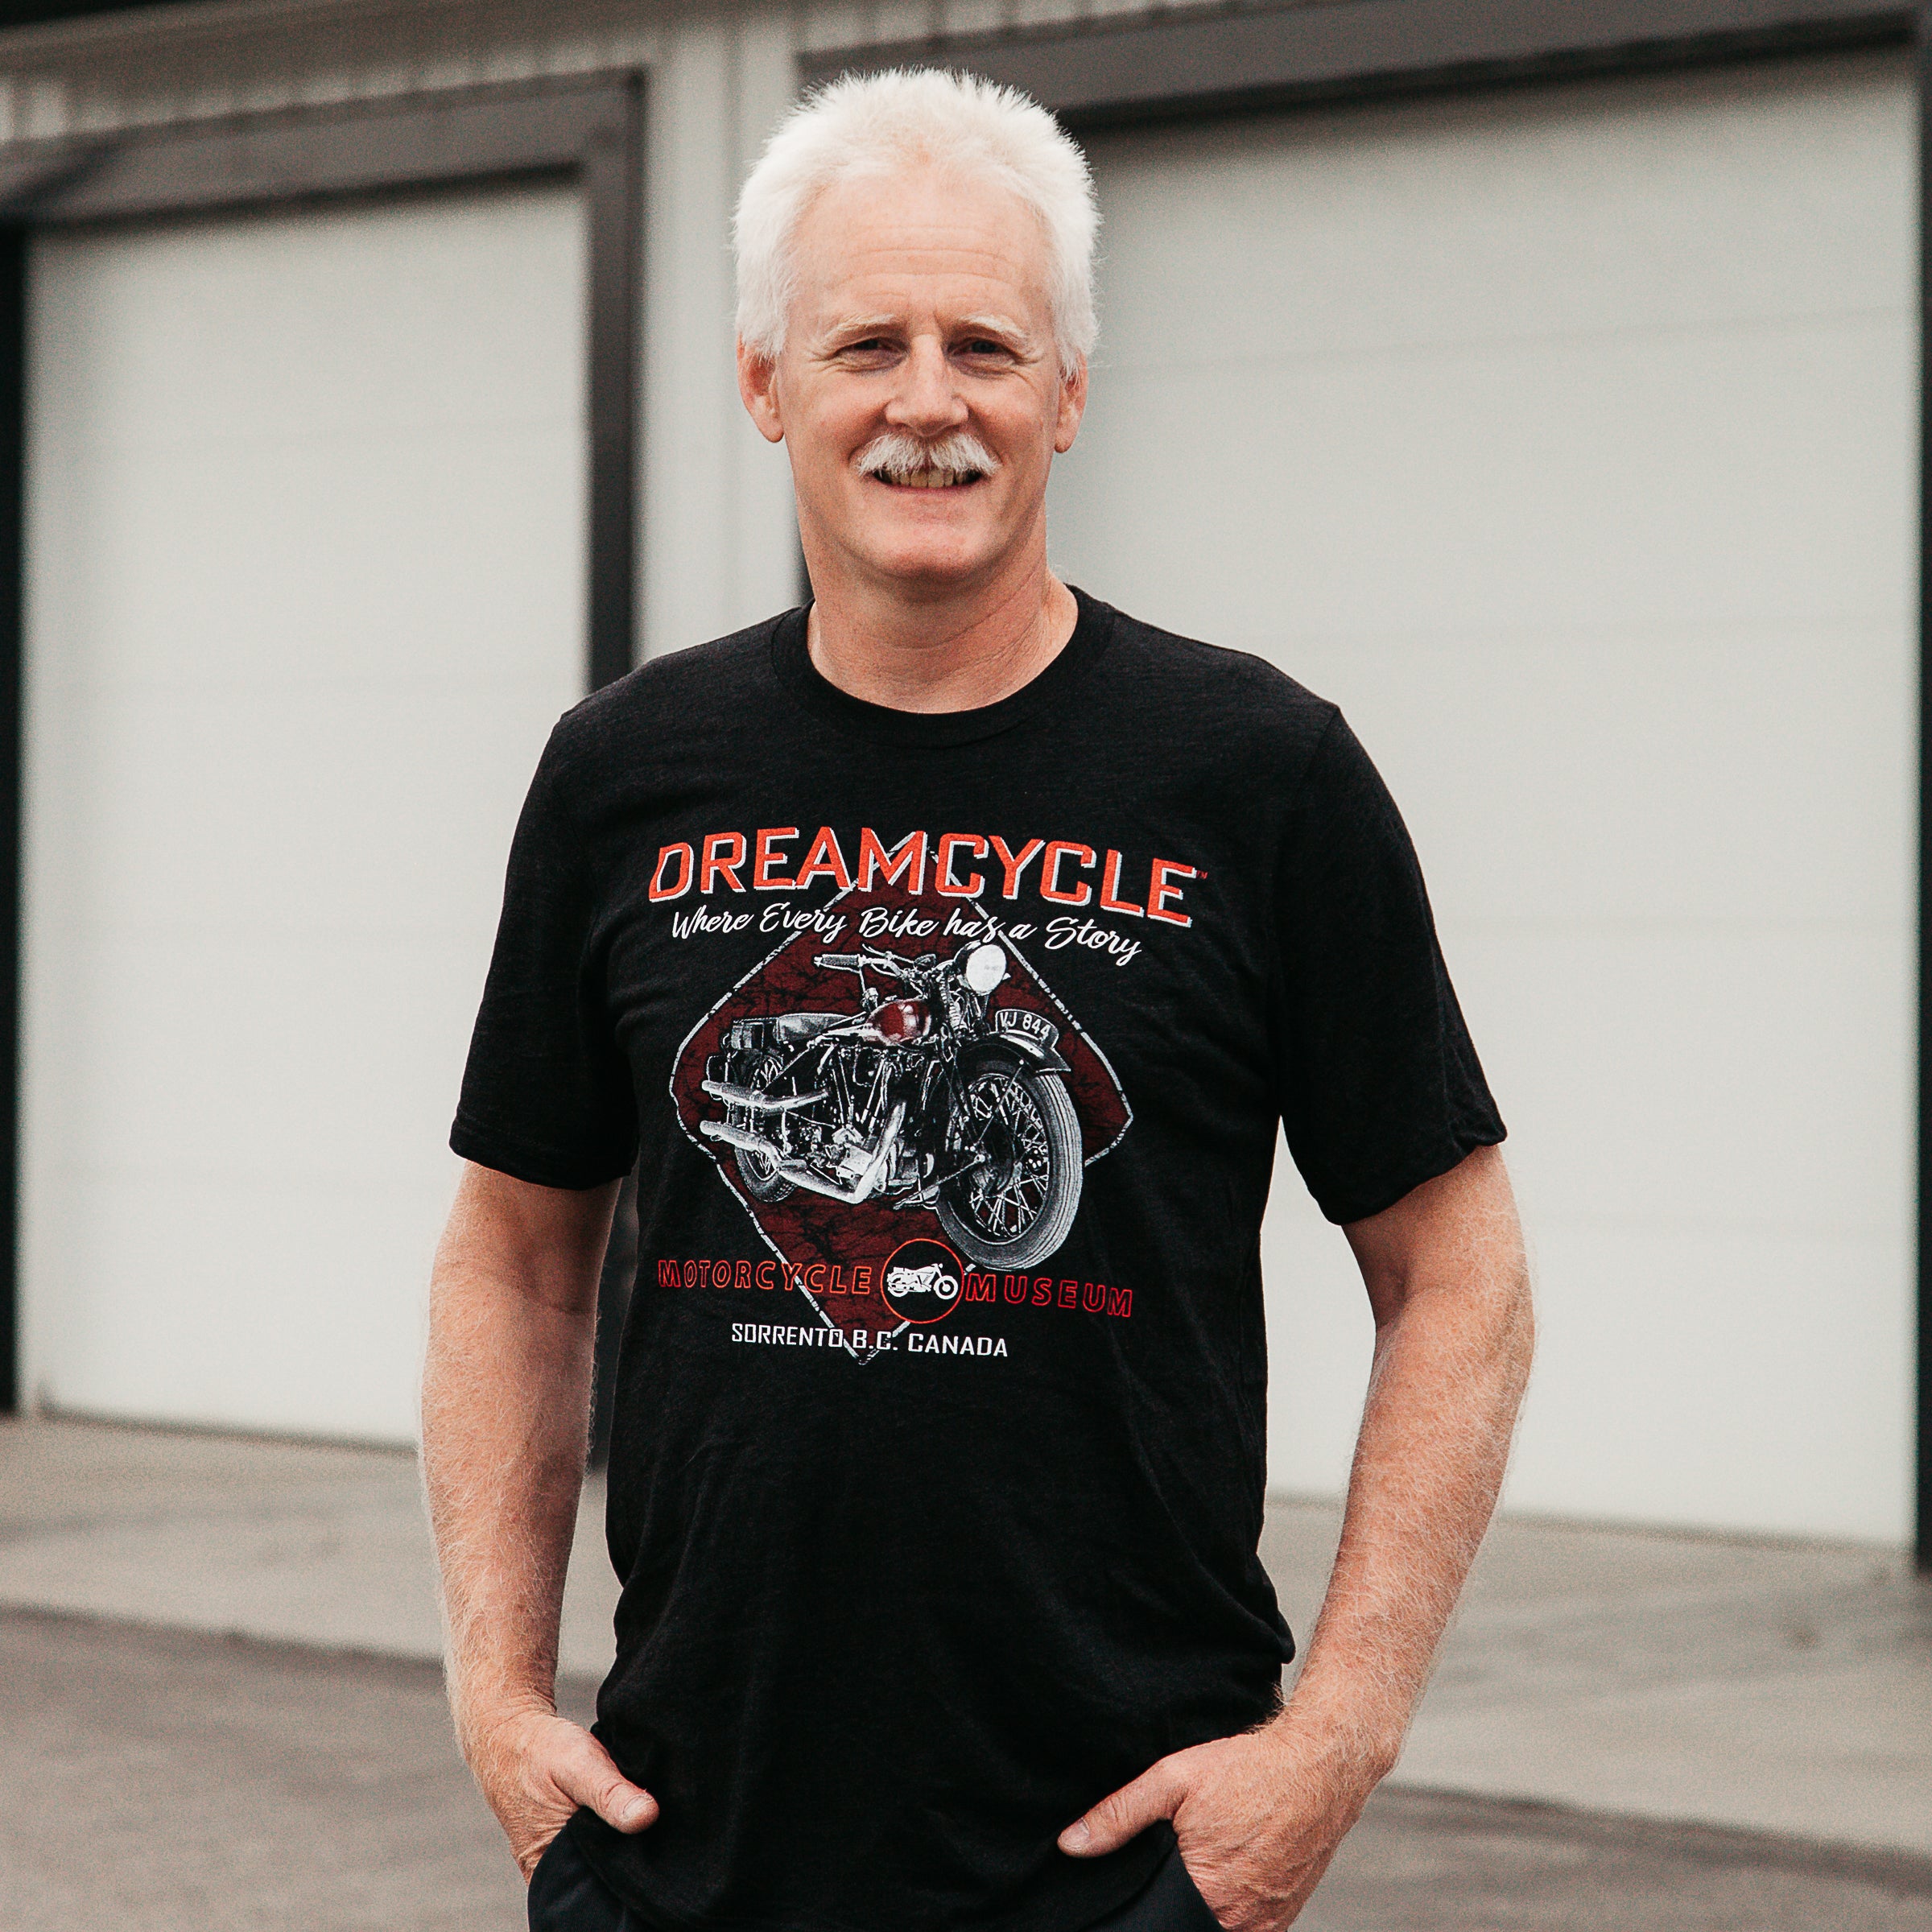 Dreamcycle Motorcycle Museum |  Man posing in lifestyle setting wearing a tshirt that says "Dreamcycle" in bold letters with a motorcycle.